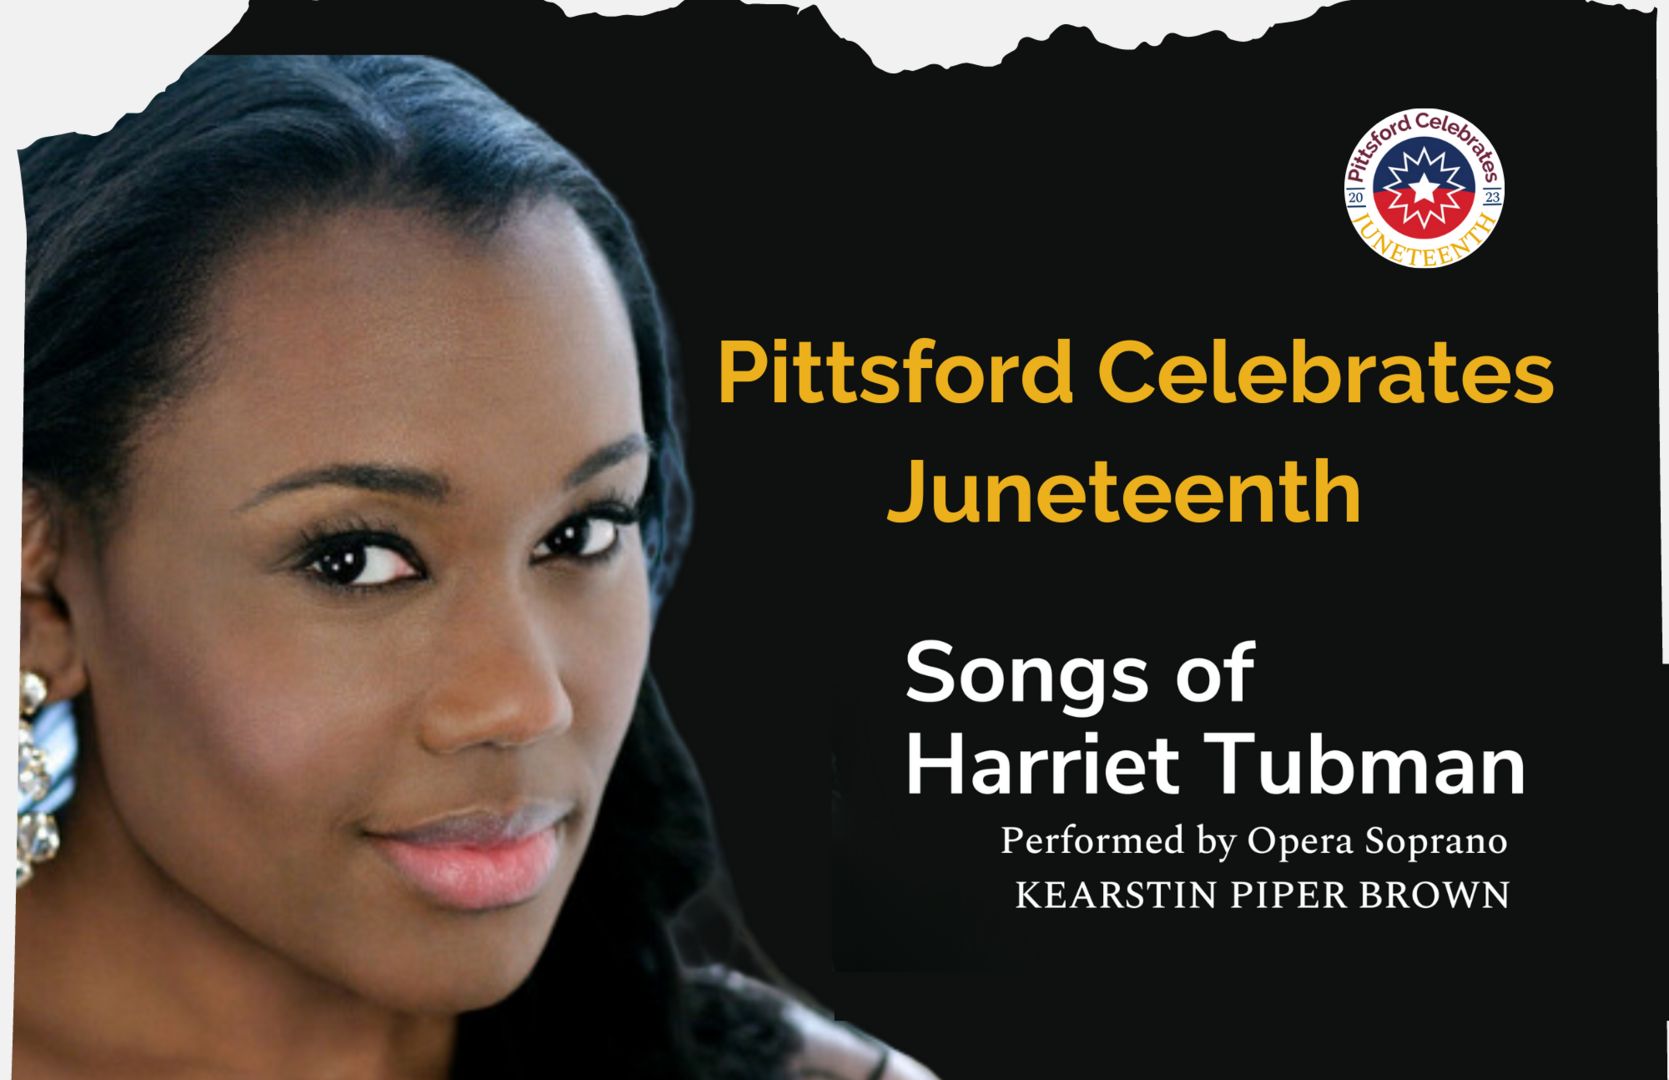 Pittsford Celebrates Juneteenth, Rochester, New York, United States